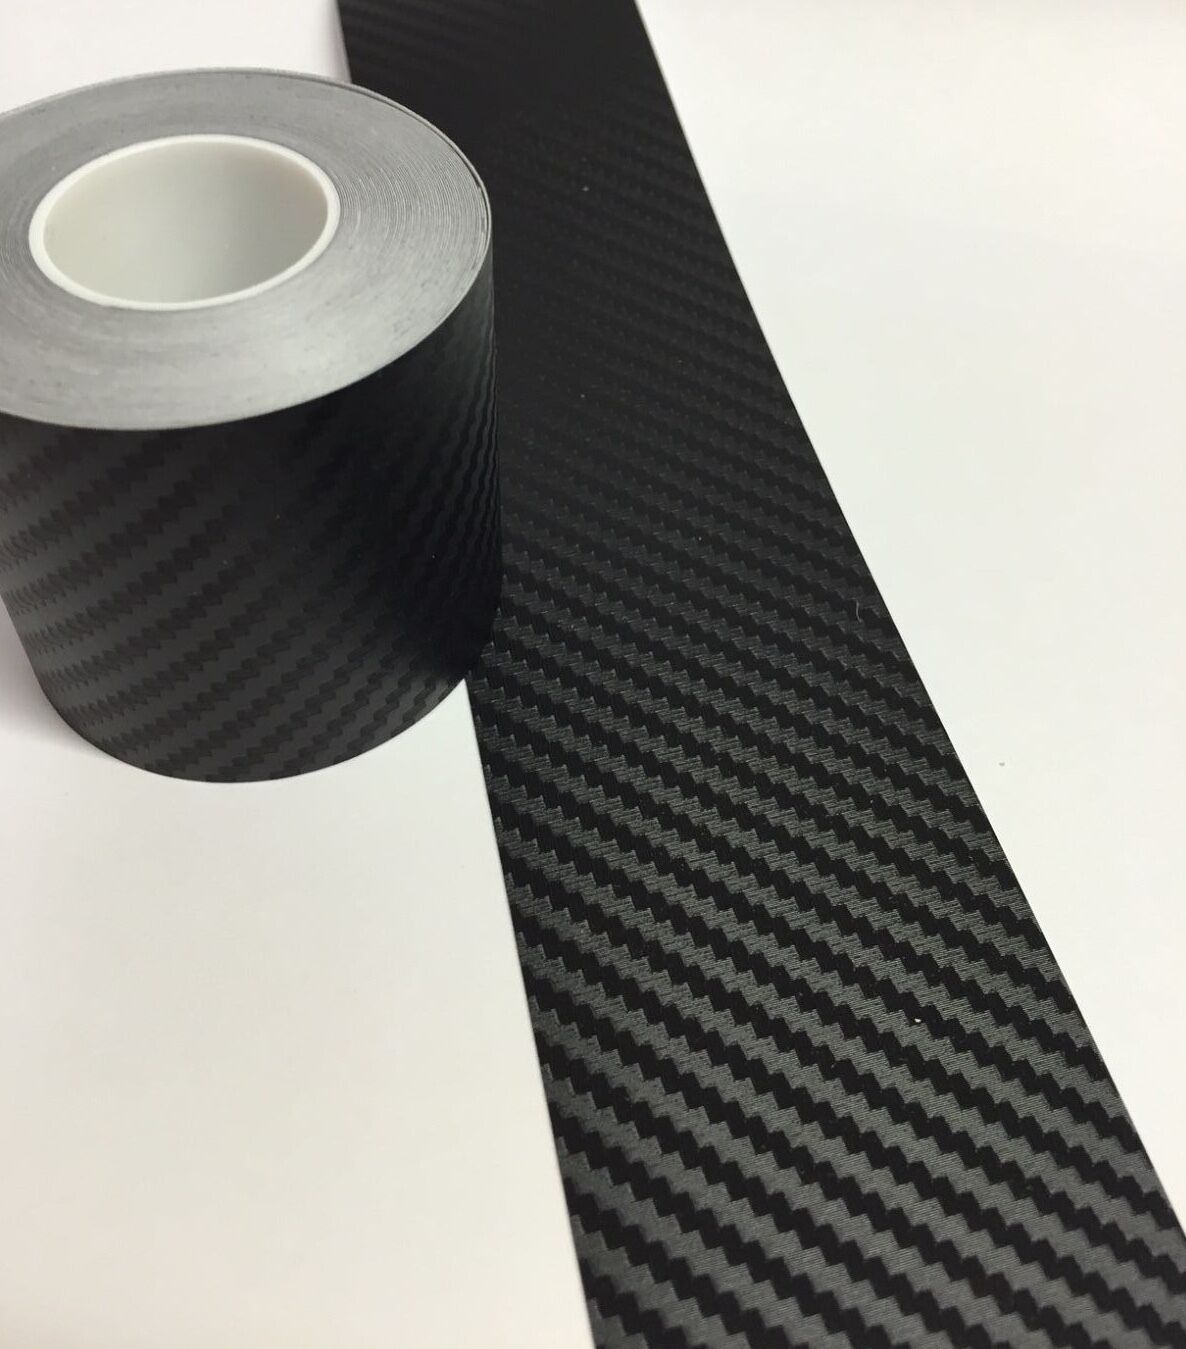 NEW Textured Carbon Fiber Tape, Flexible 6mil Thick, Automotive Grade Quality PSP Does Not Apply